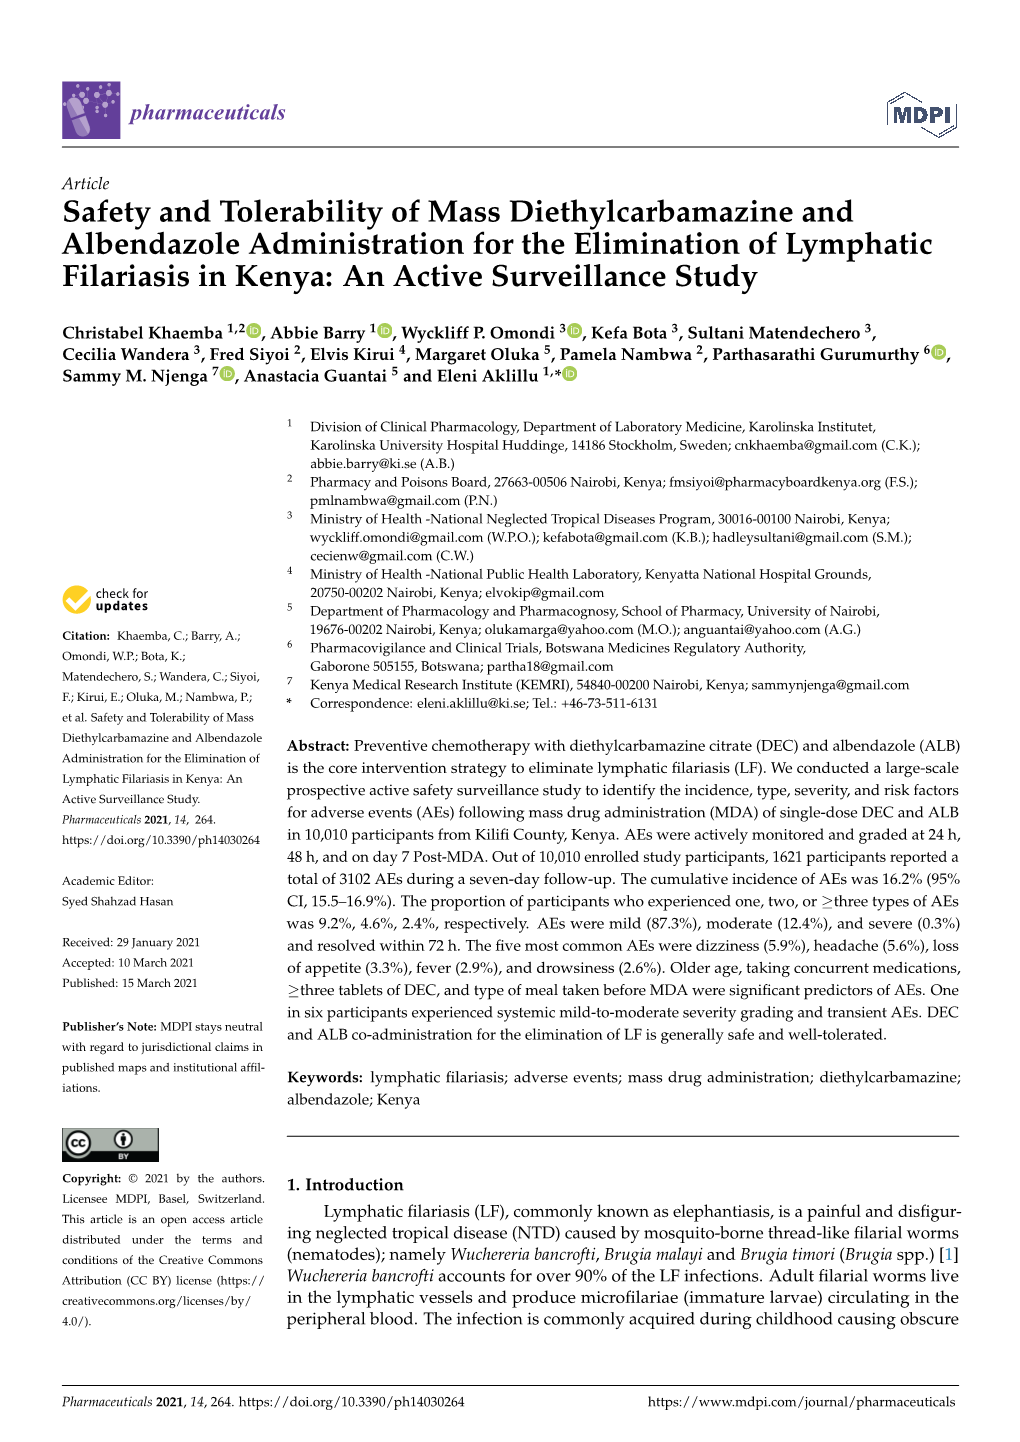 Safety and Tolerability of Mass Diethylcarbamazine and Albendazole Administration for the Elimination of Lymphatic Filariasis in Kenya: an Active Surveillance Study